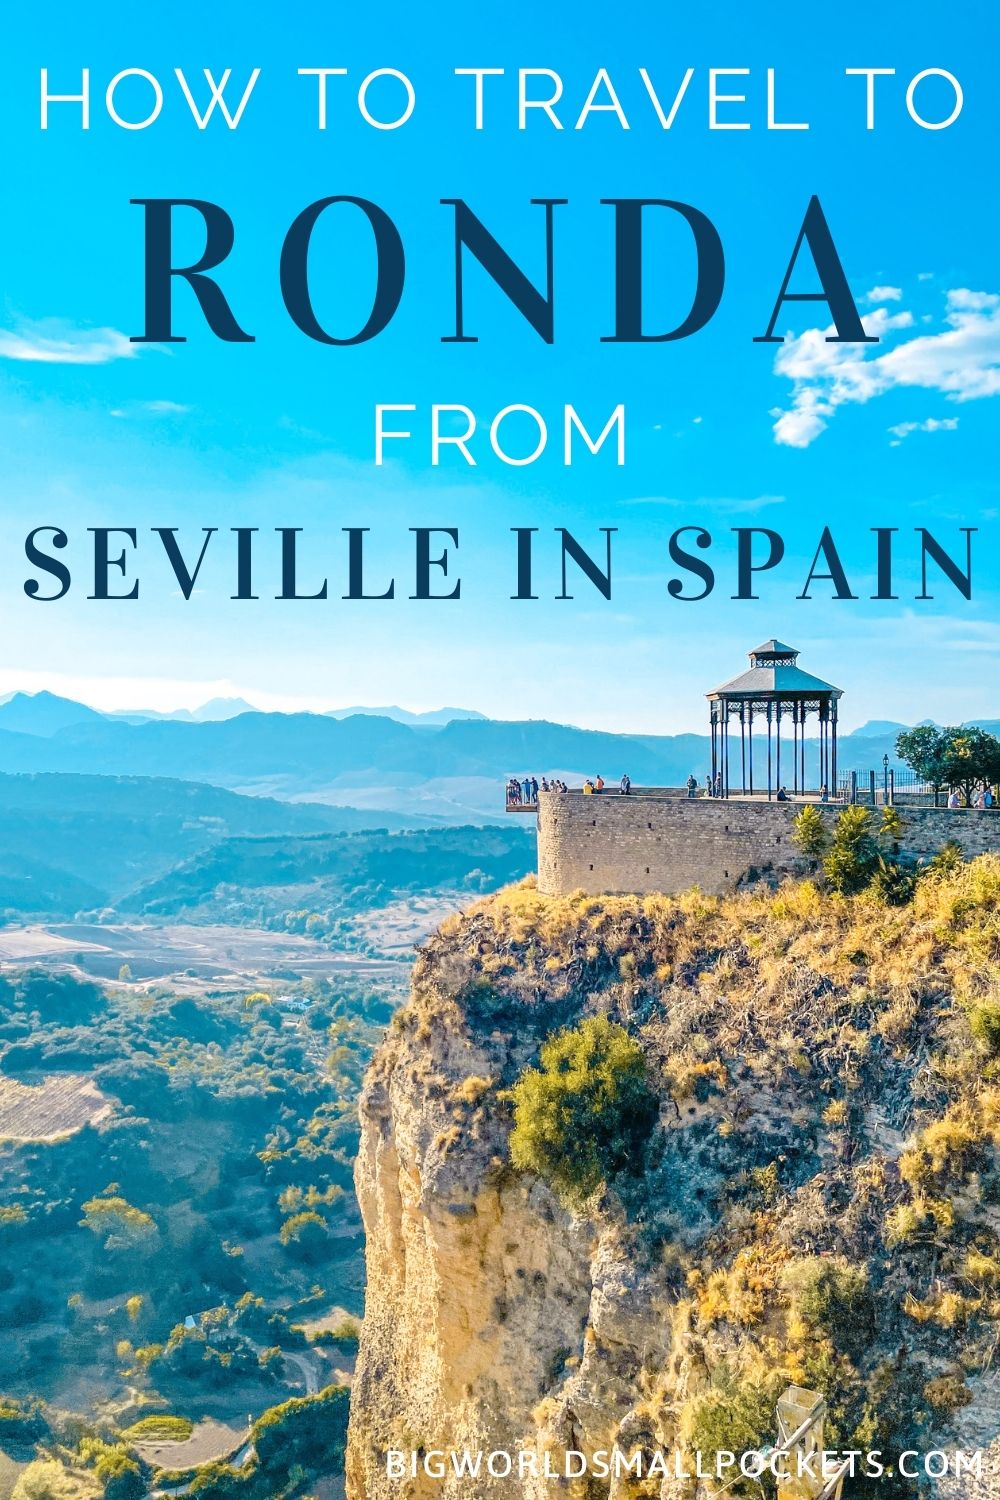 How to Get to Ronda from Seville in Spain